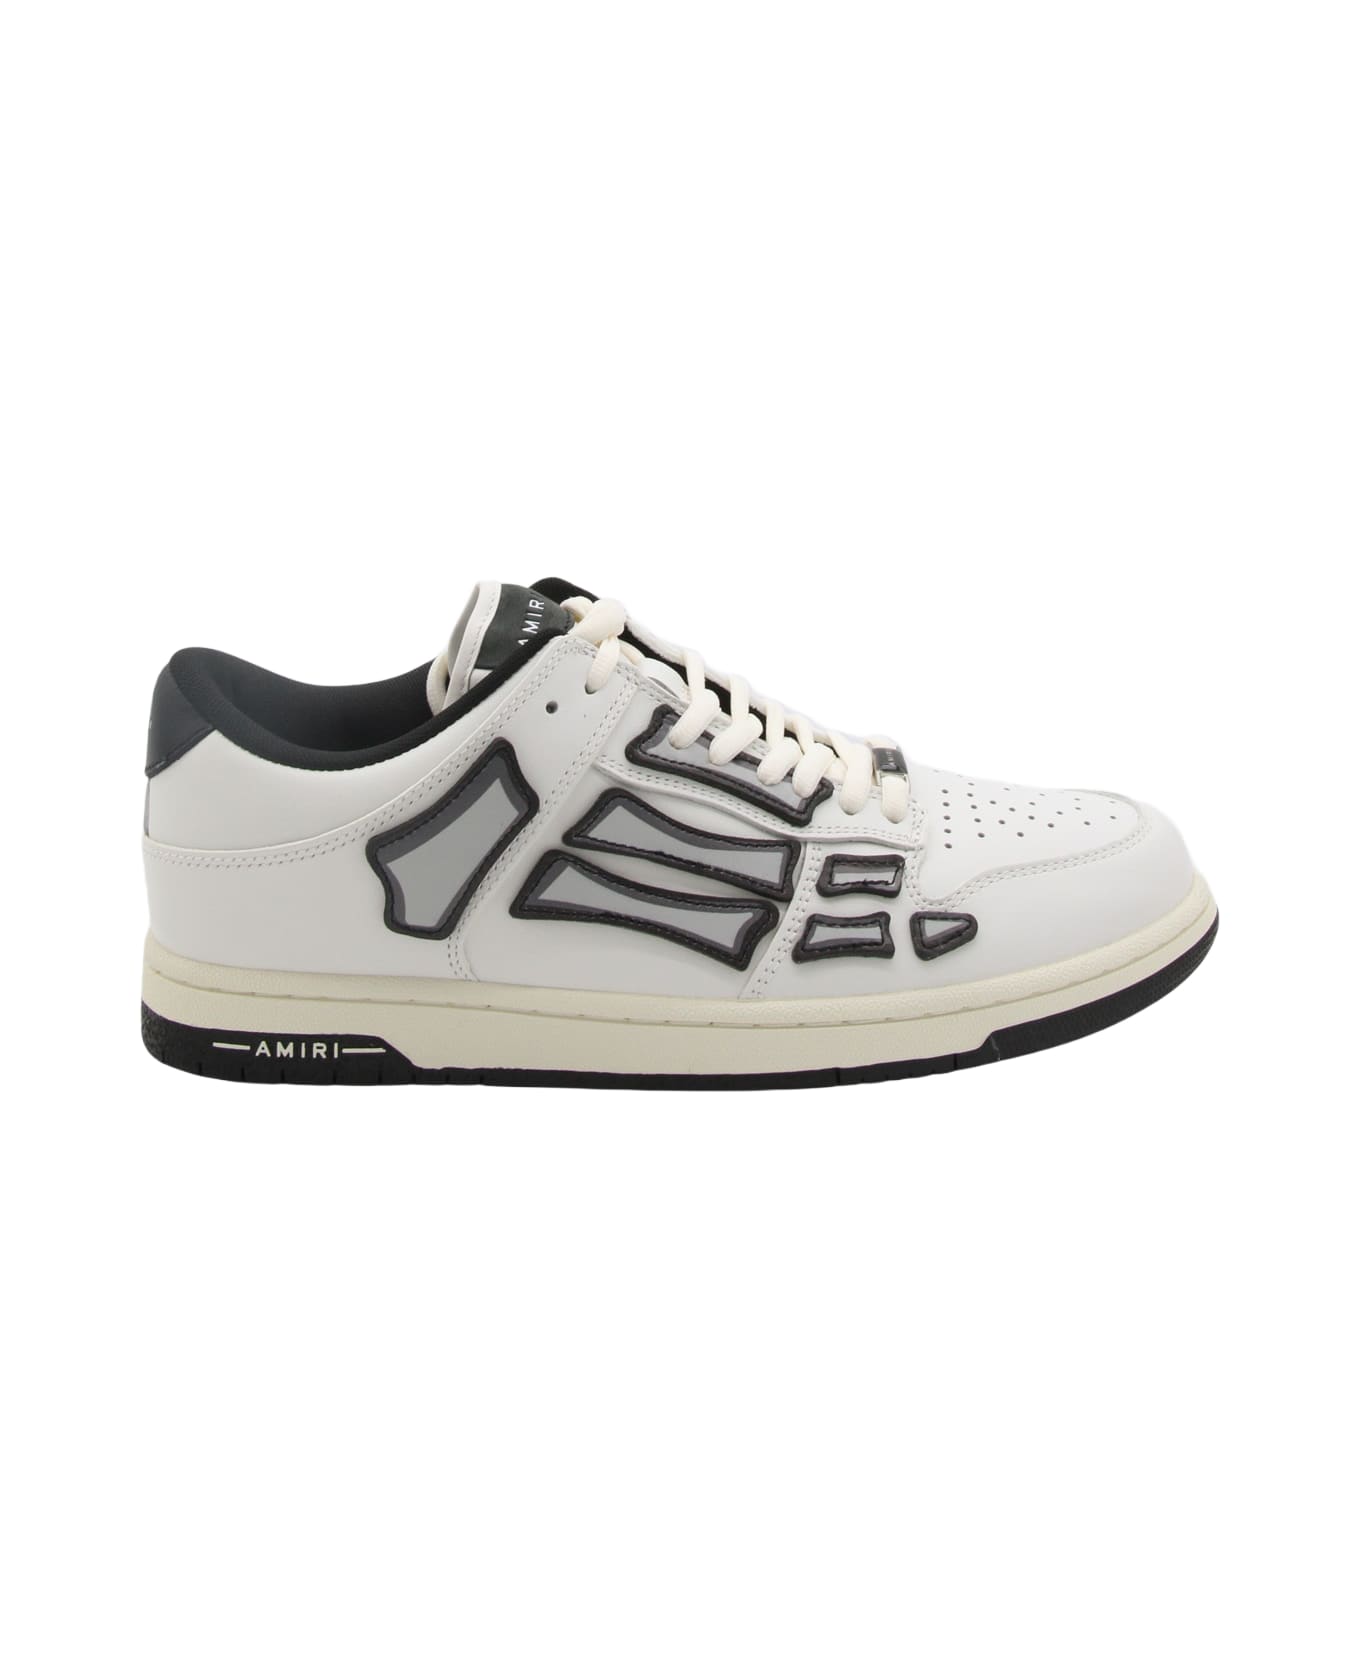 AMIRI White And Black Leather Sneakers - White スニーカー